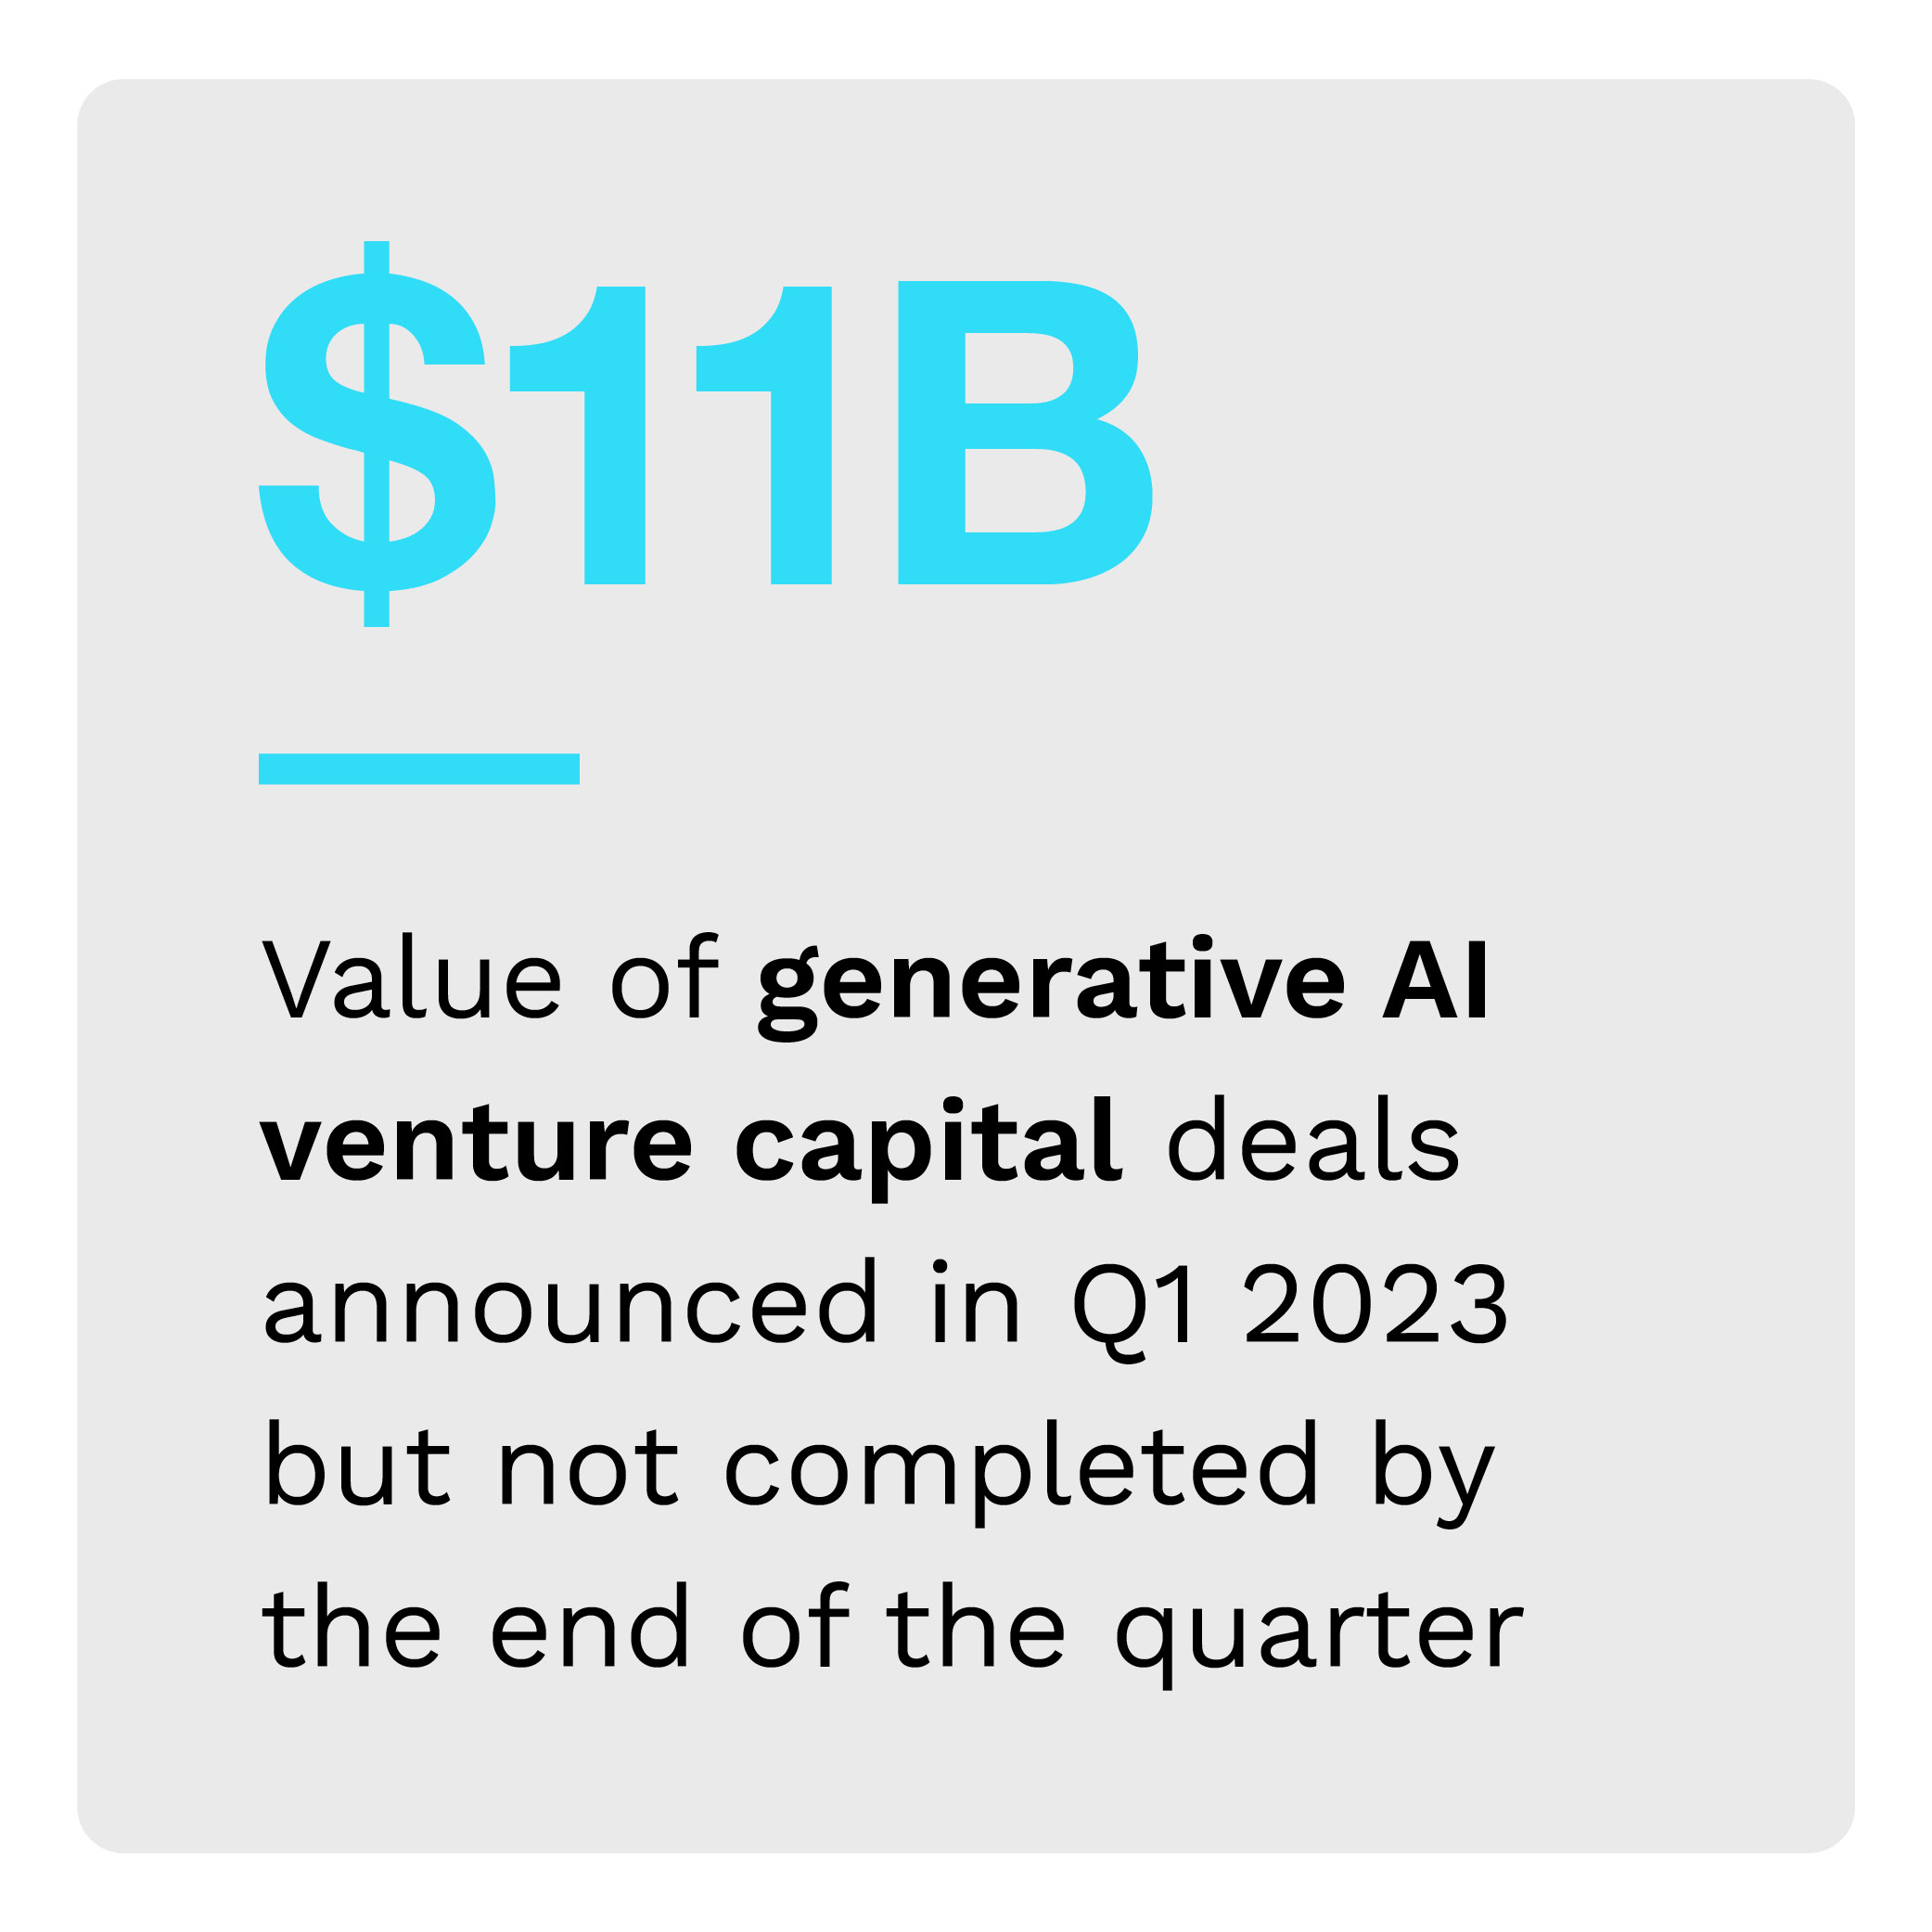 $11B: Value of generative AI venture capital deals announced in Q1 2023 but not completed by the end of the quarter